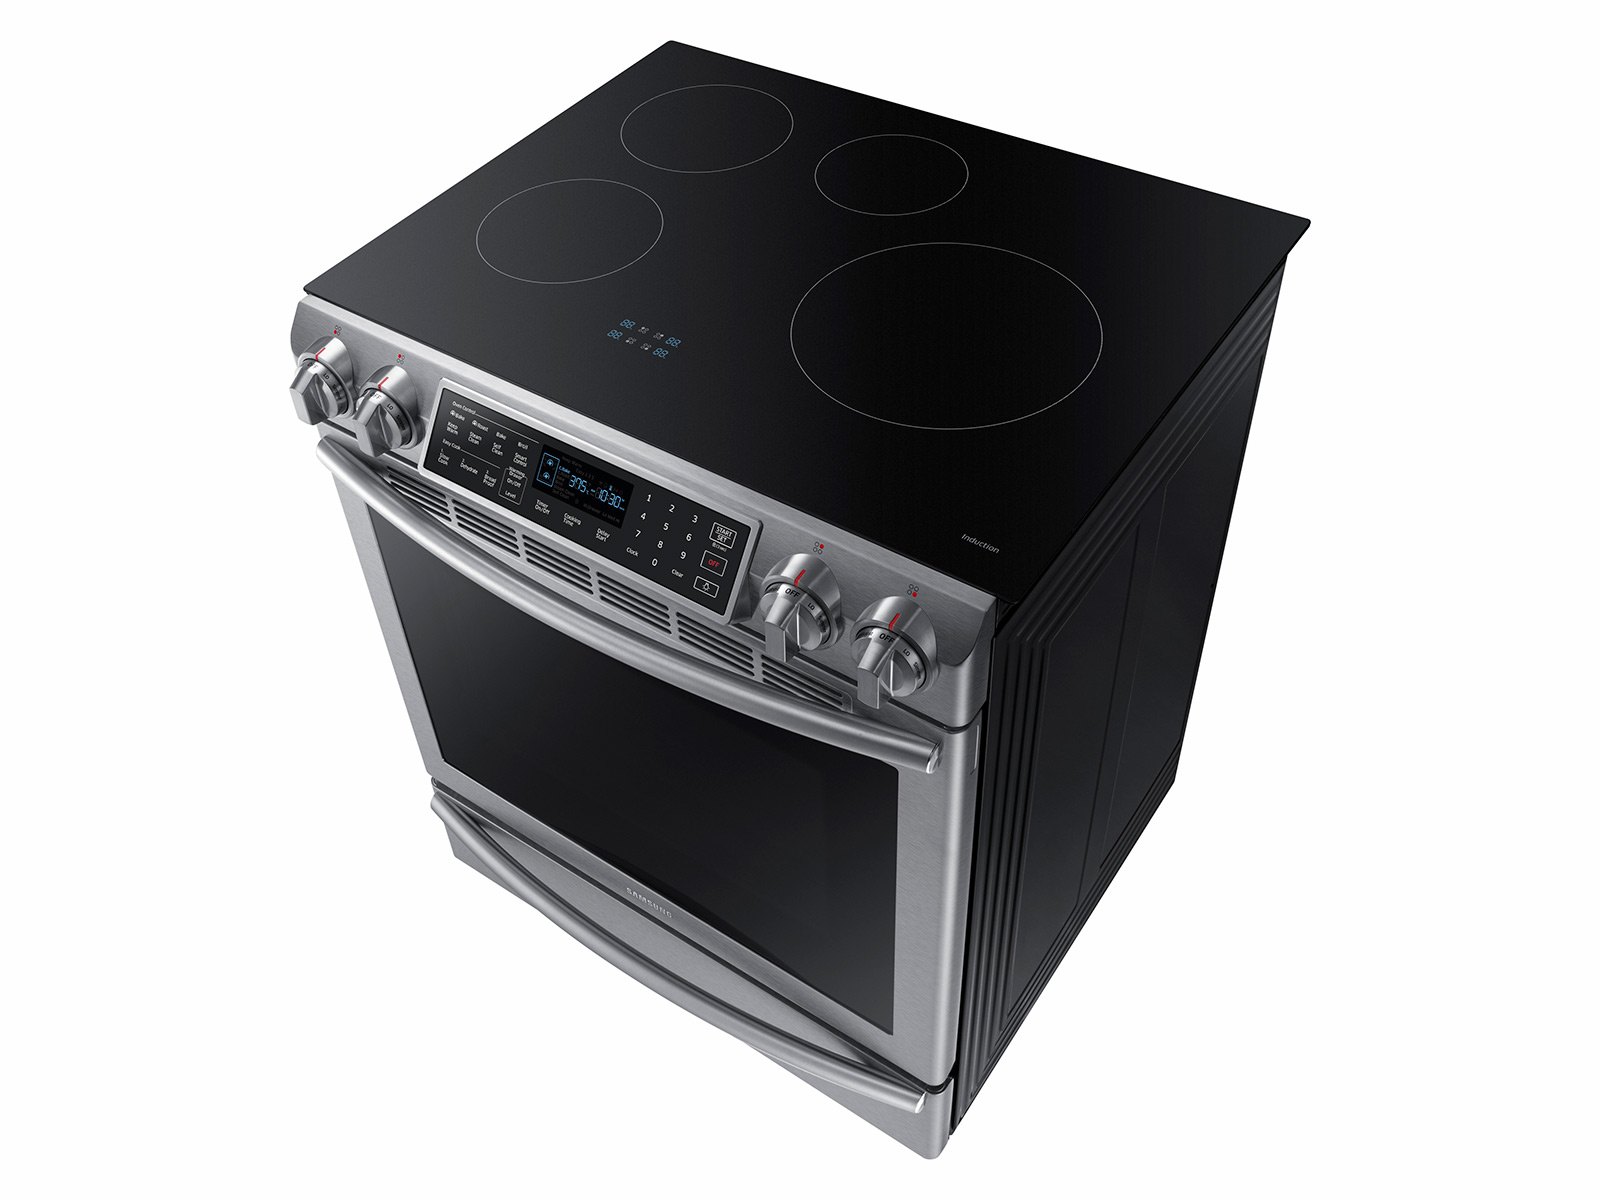 Samsung Electric stove (glass top ) – Plaza Appliances